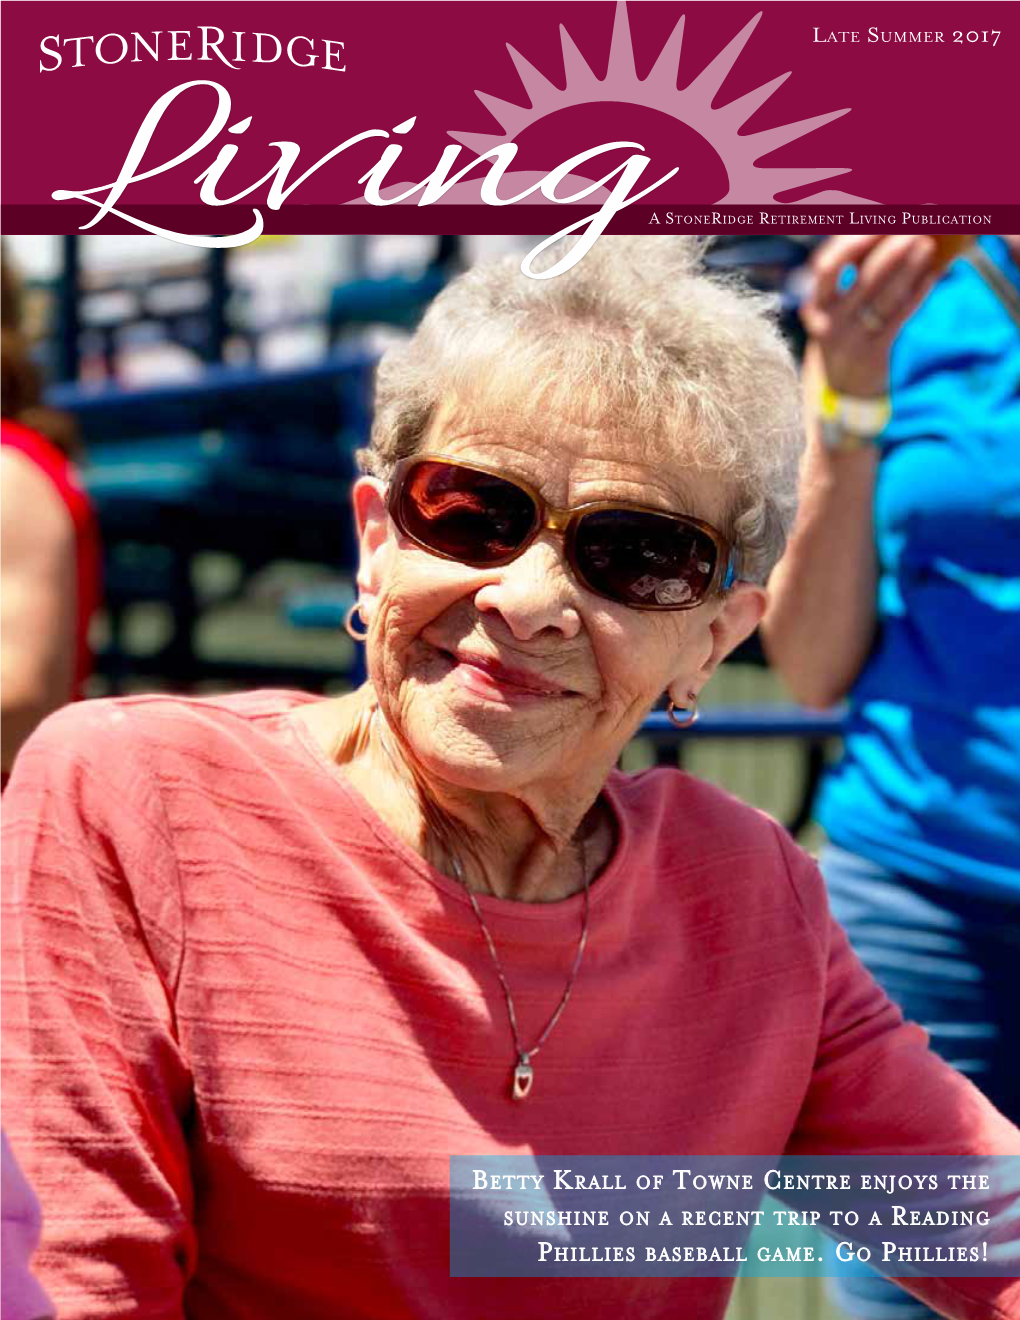 Betty Krall of Towne Centre Enjoys the Sunshine on a Recent Trip to a Reading Phillies Baseball Game